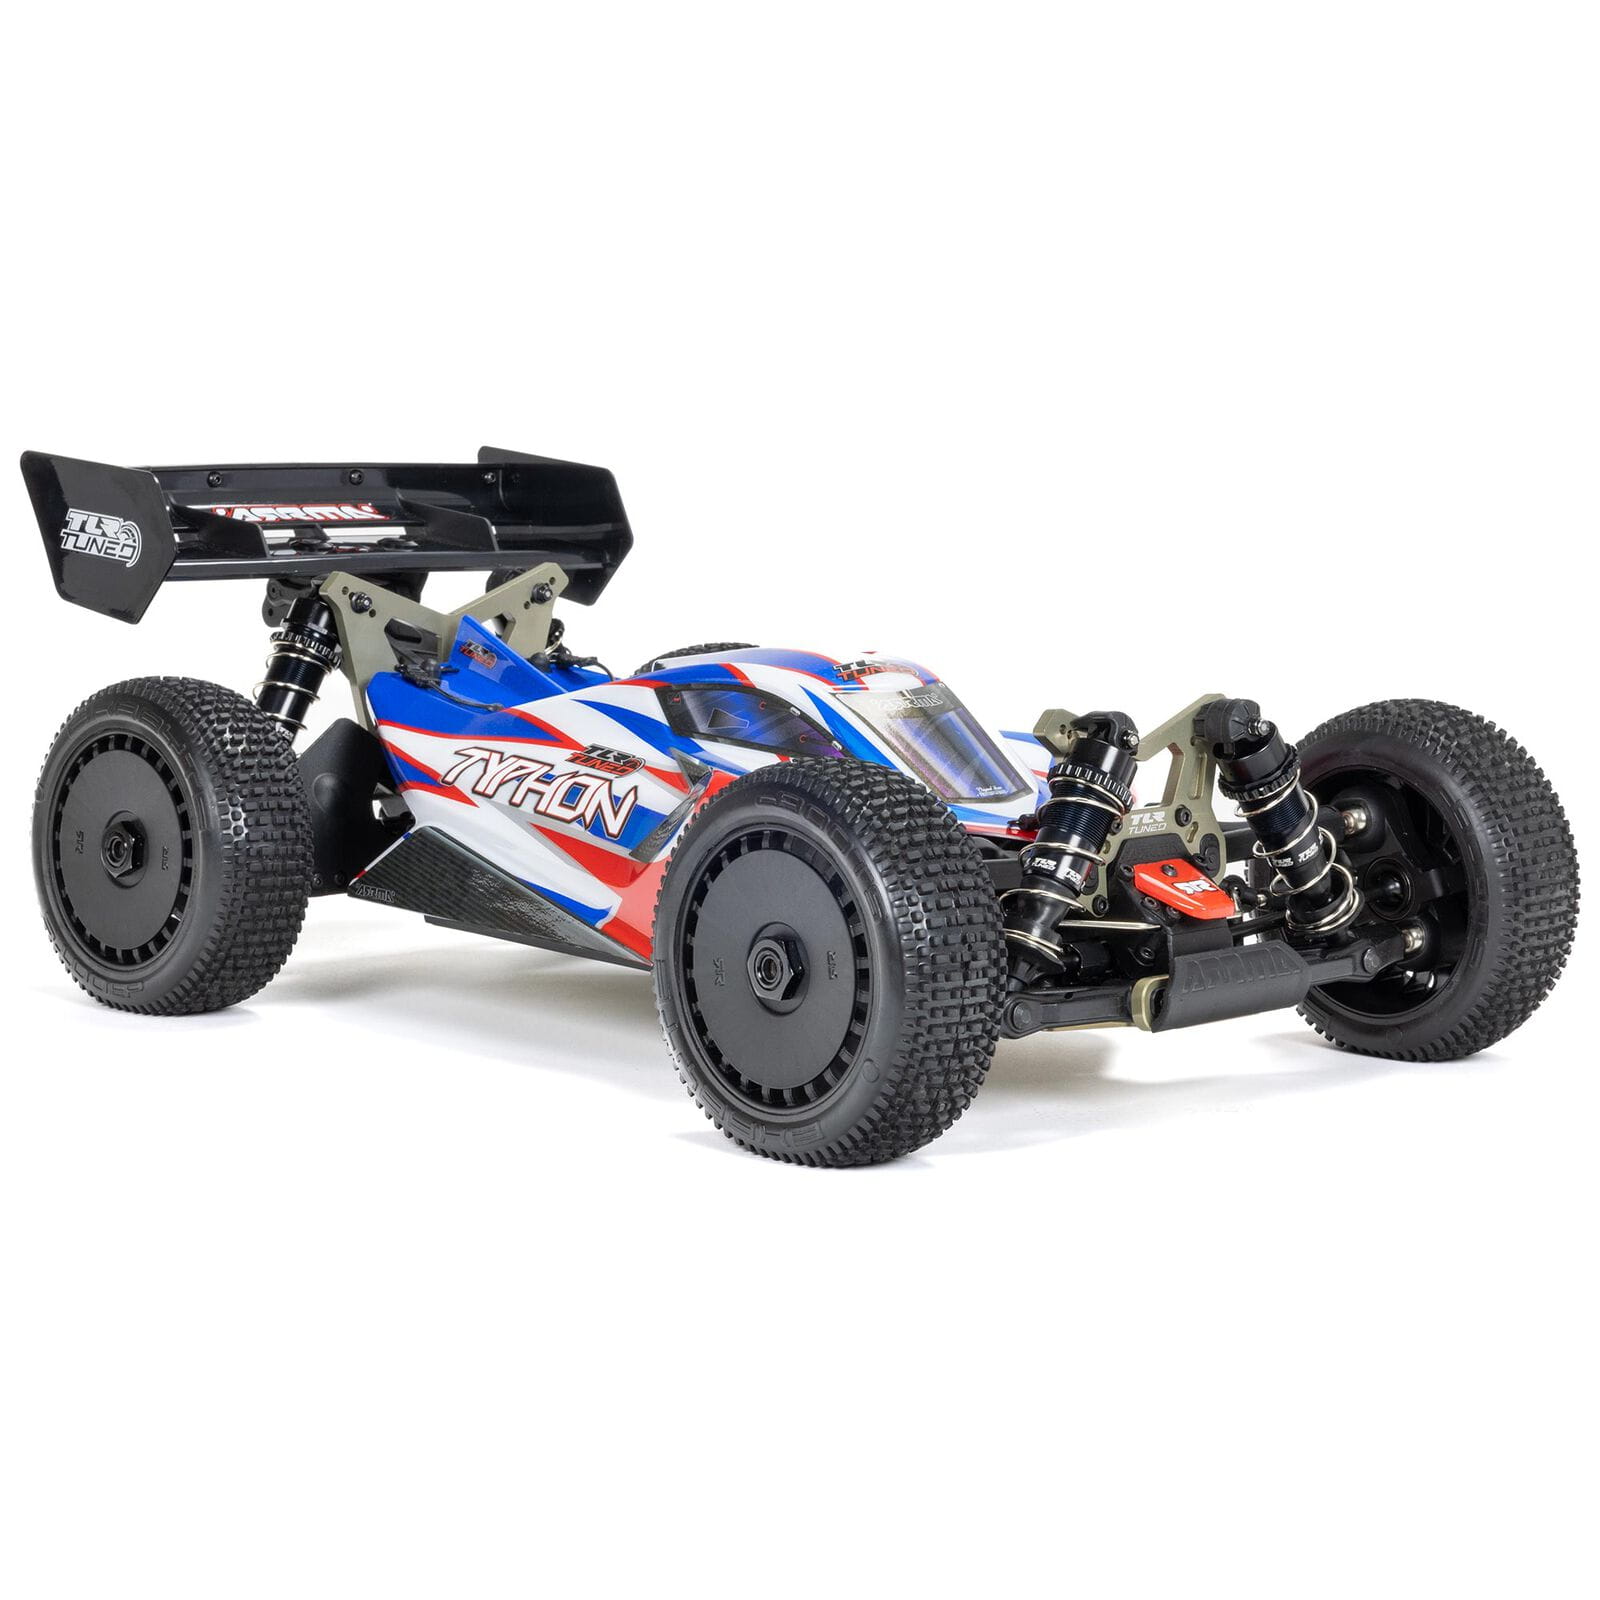 Arrma RC 1:8 TLR Tuned Typhon Brushless Buggy RTR